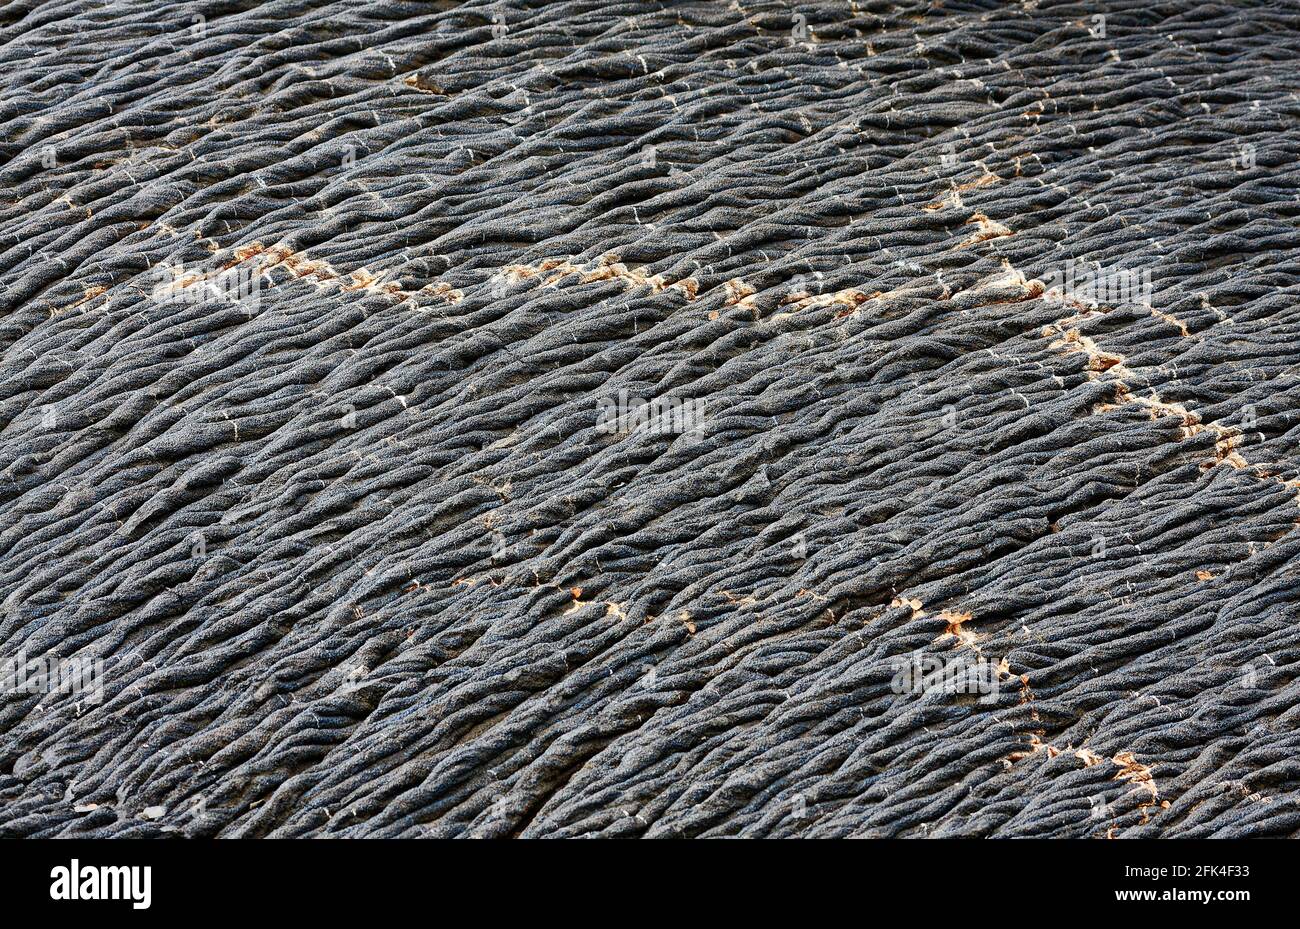 ropey pahoehoe lava, grey shades, colored mineral veins, volcanic flow, basalt, nature, South America, Galapagos Islands; Santiago Island, Ecuador Stock Photo